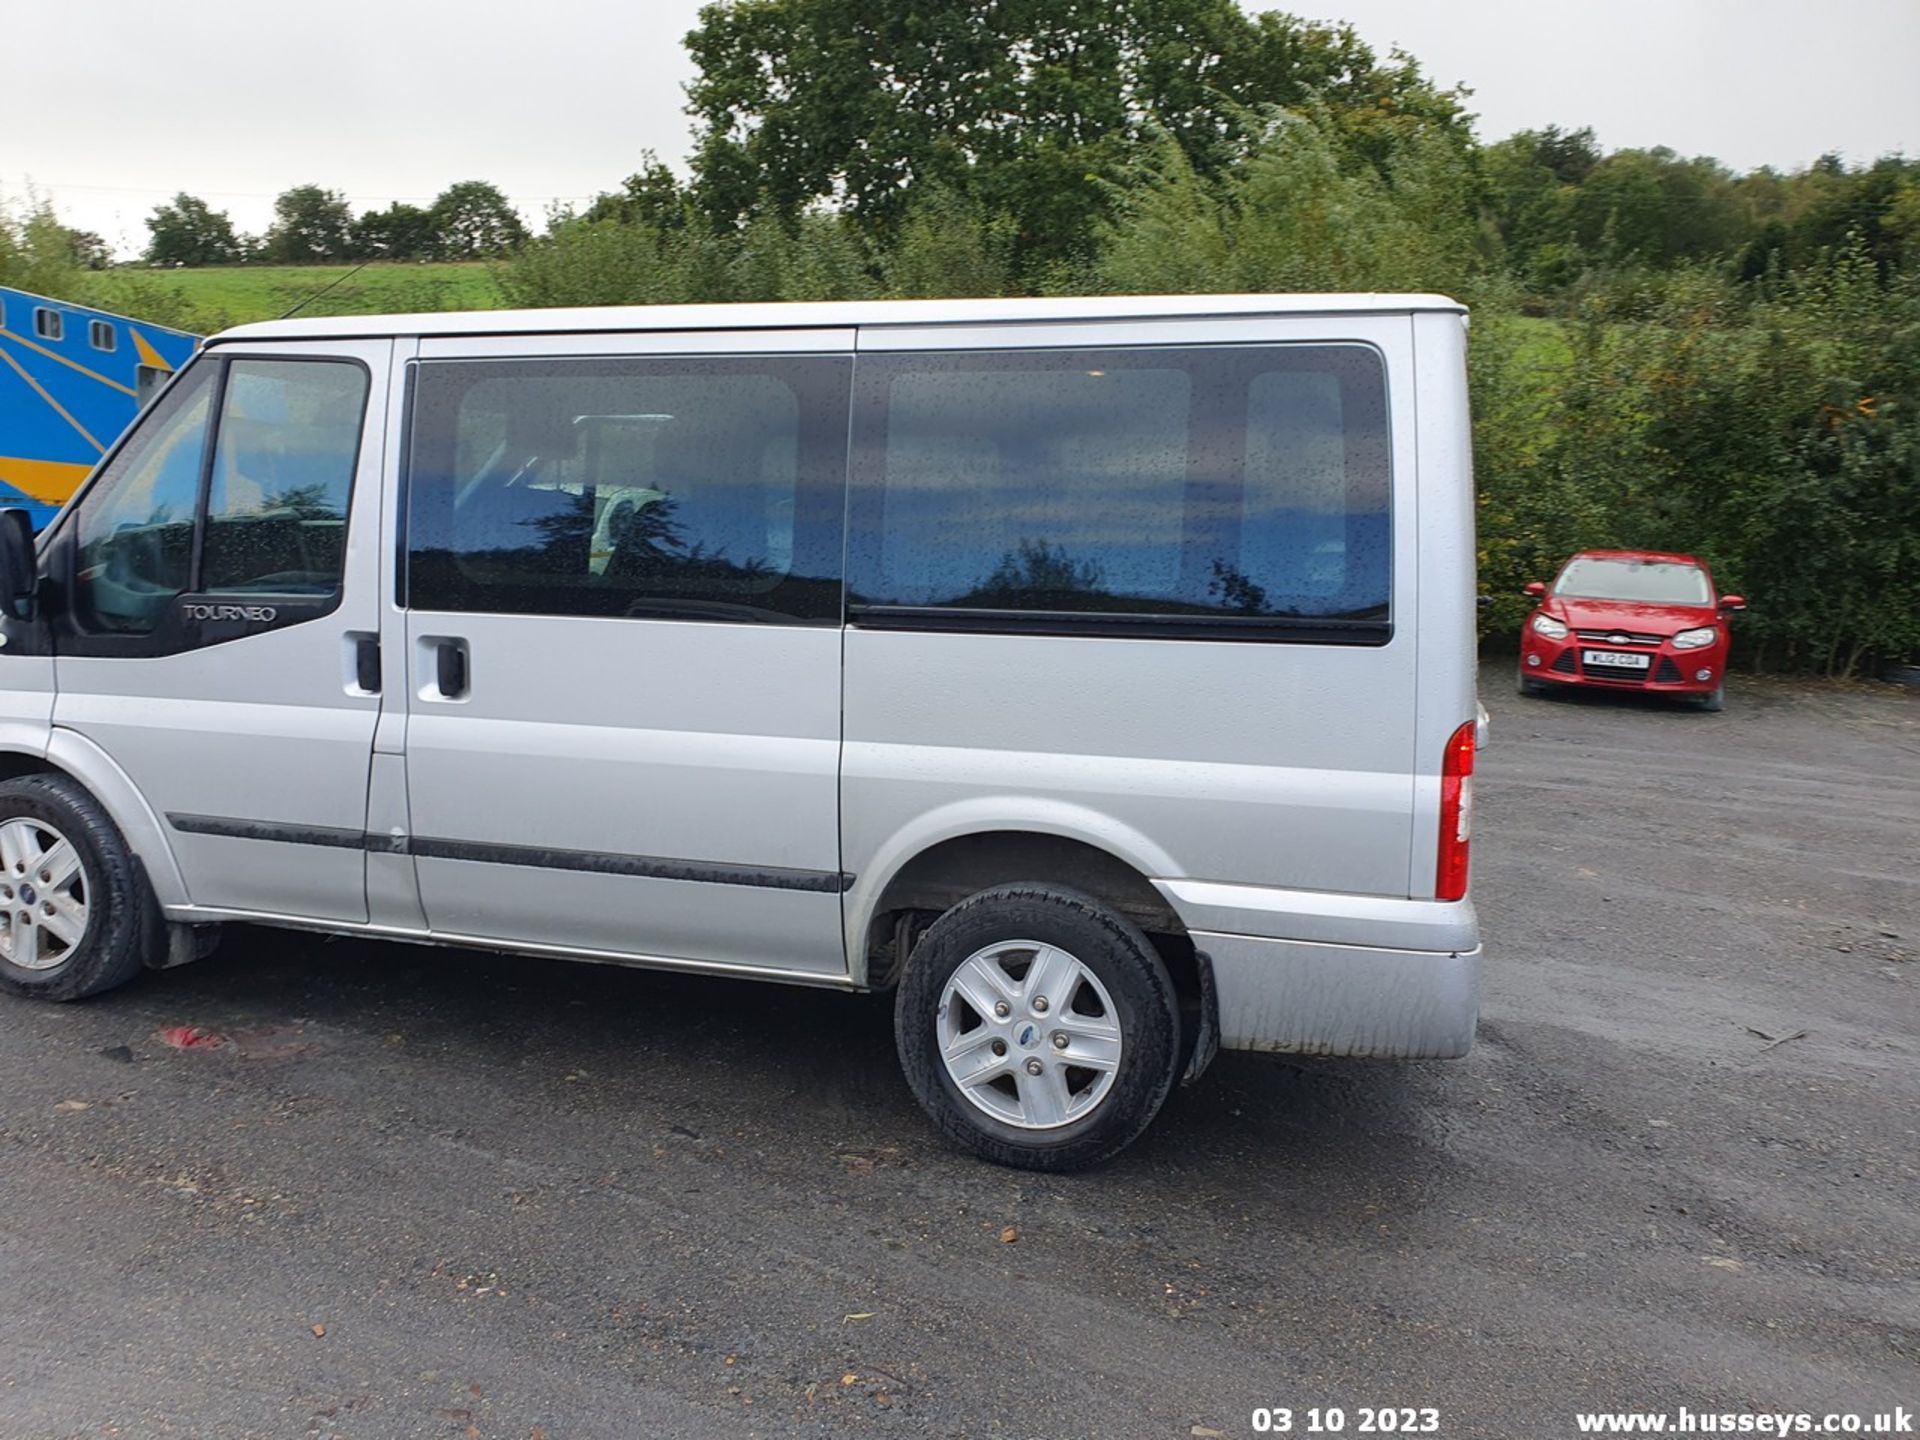 13/62 FORD TRANSIT 125 T280 FWD - 2198cc 5dr MPV (Silver, 146k) - Image 13 of 65